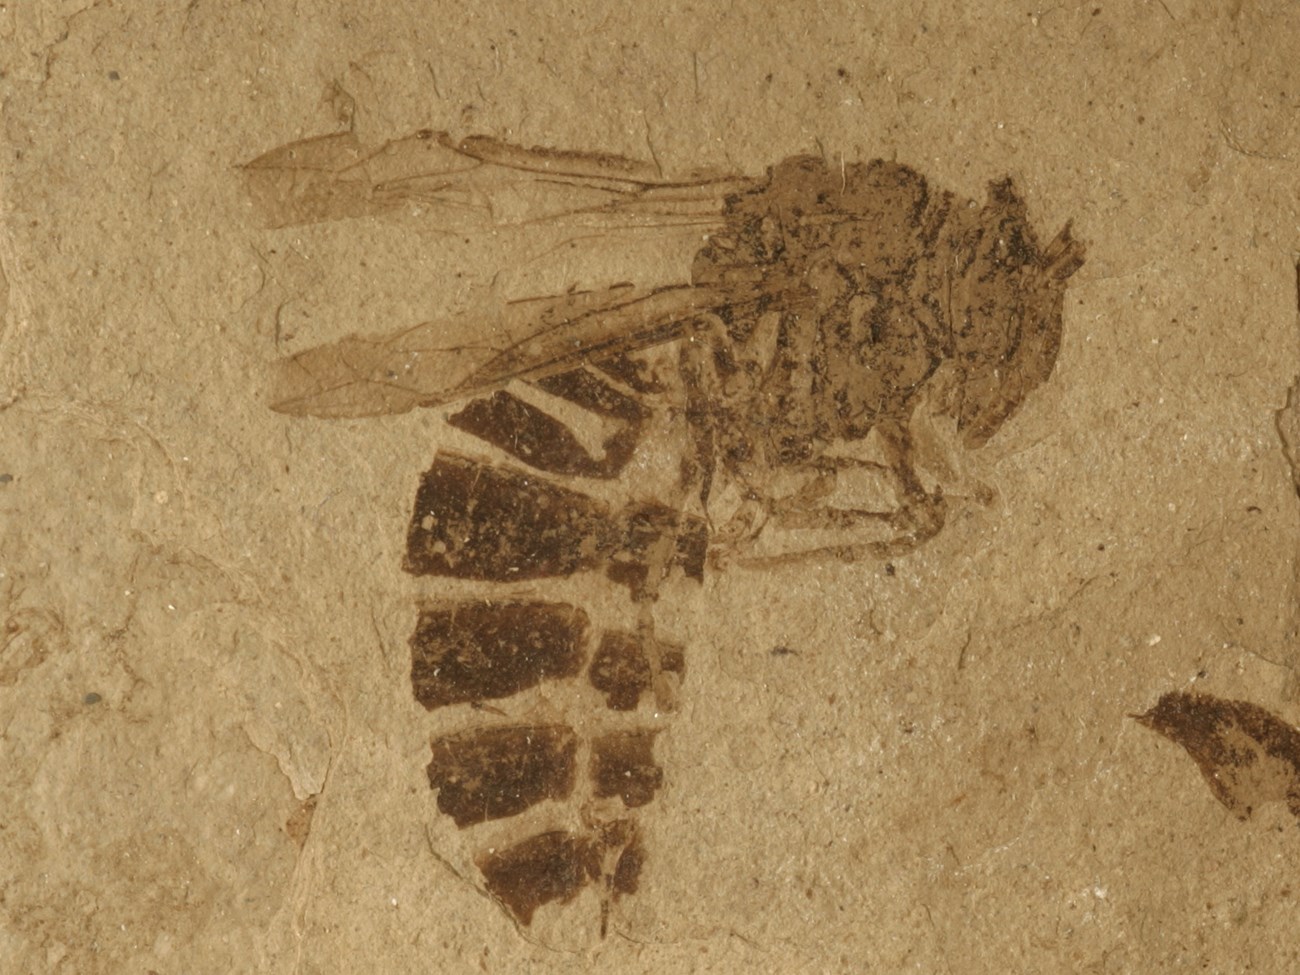 Photo of a fossil wasp on a rock slab.